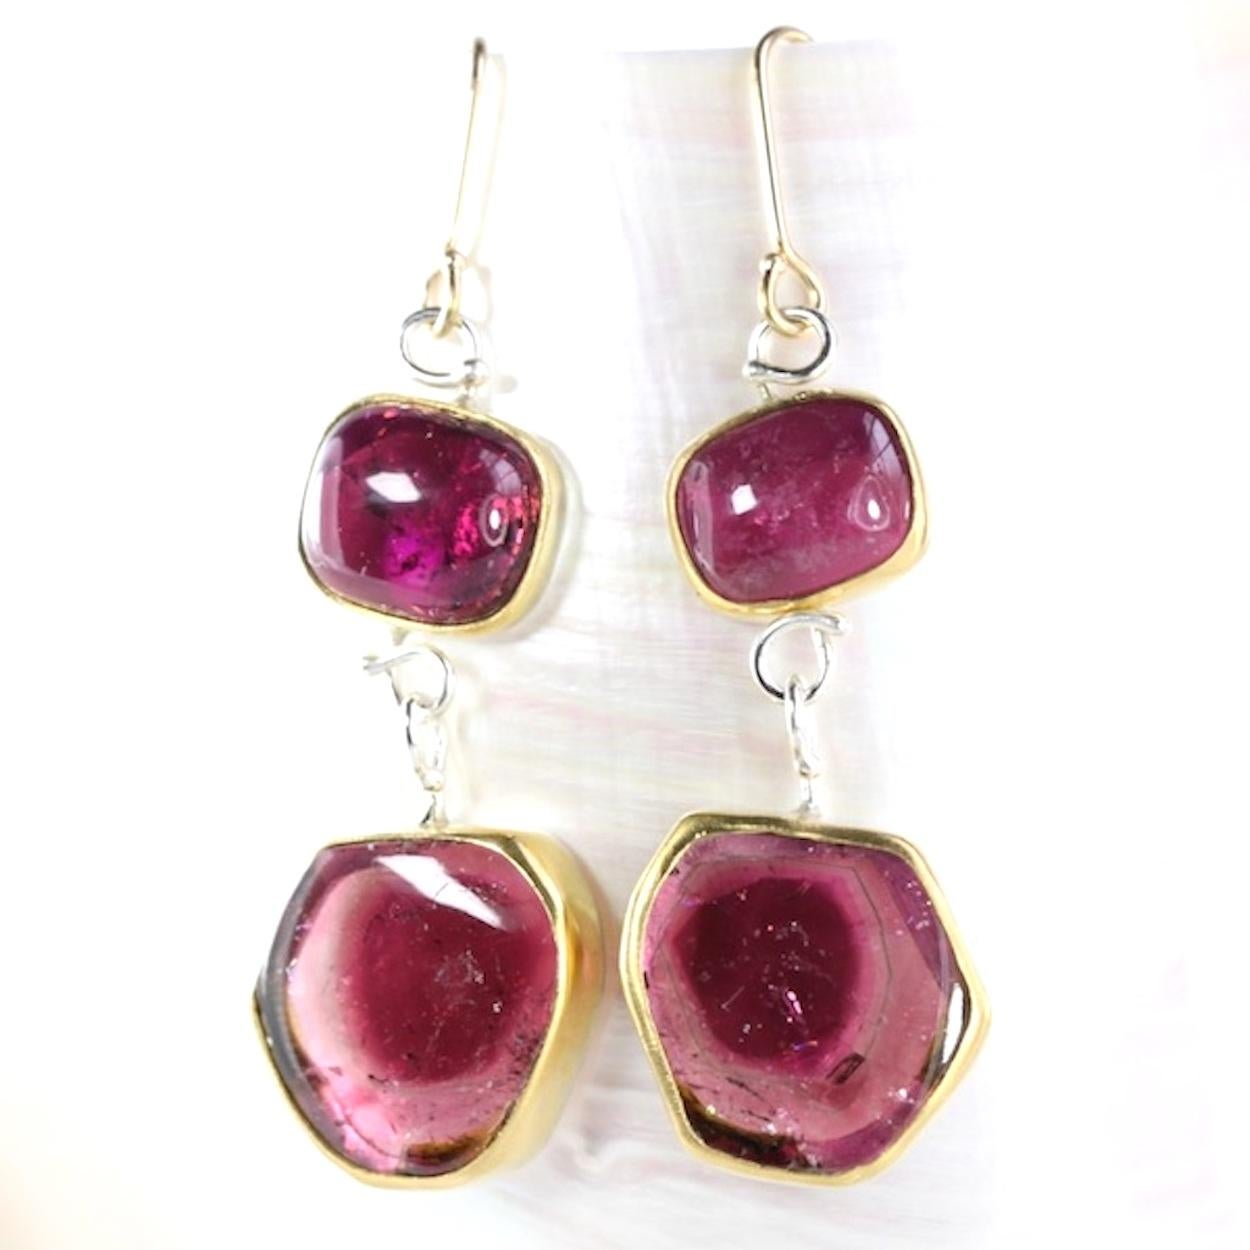 Rubelite earrings with deep pink on pink watermelon tourmaline drops. Rubelite cabochon and watermelon tourmaline slices, all handset in 22K gold bezels with sterling silver cut out backs, sterling silver wirework. Handmade 18K gold earwires.